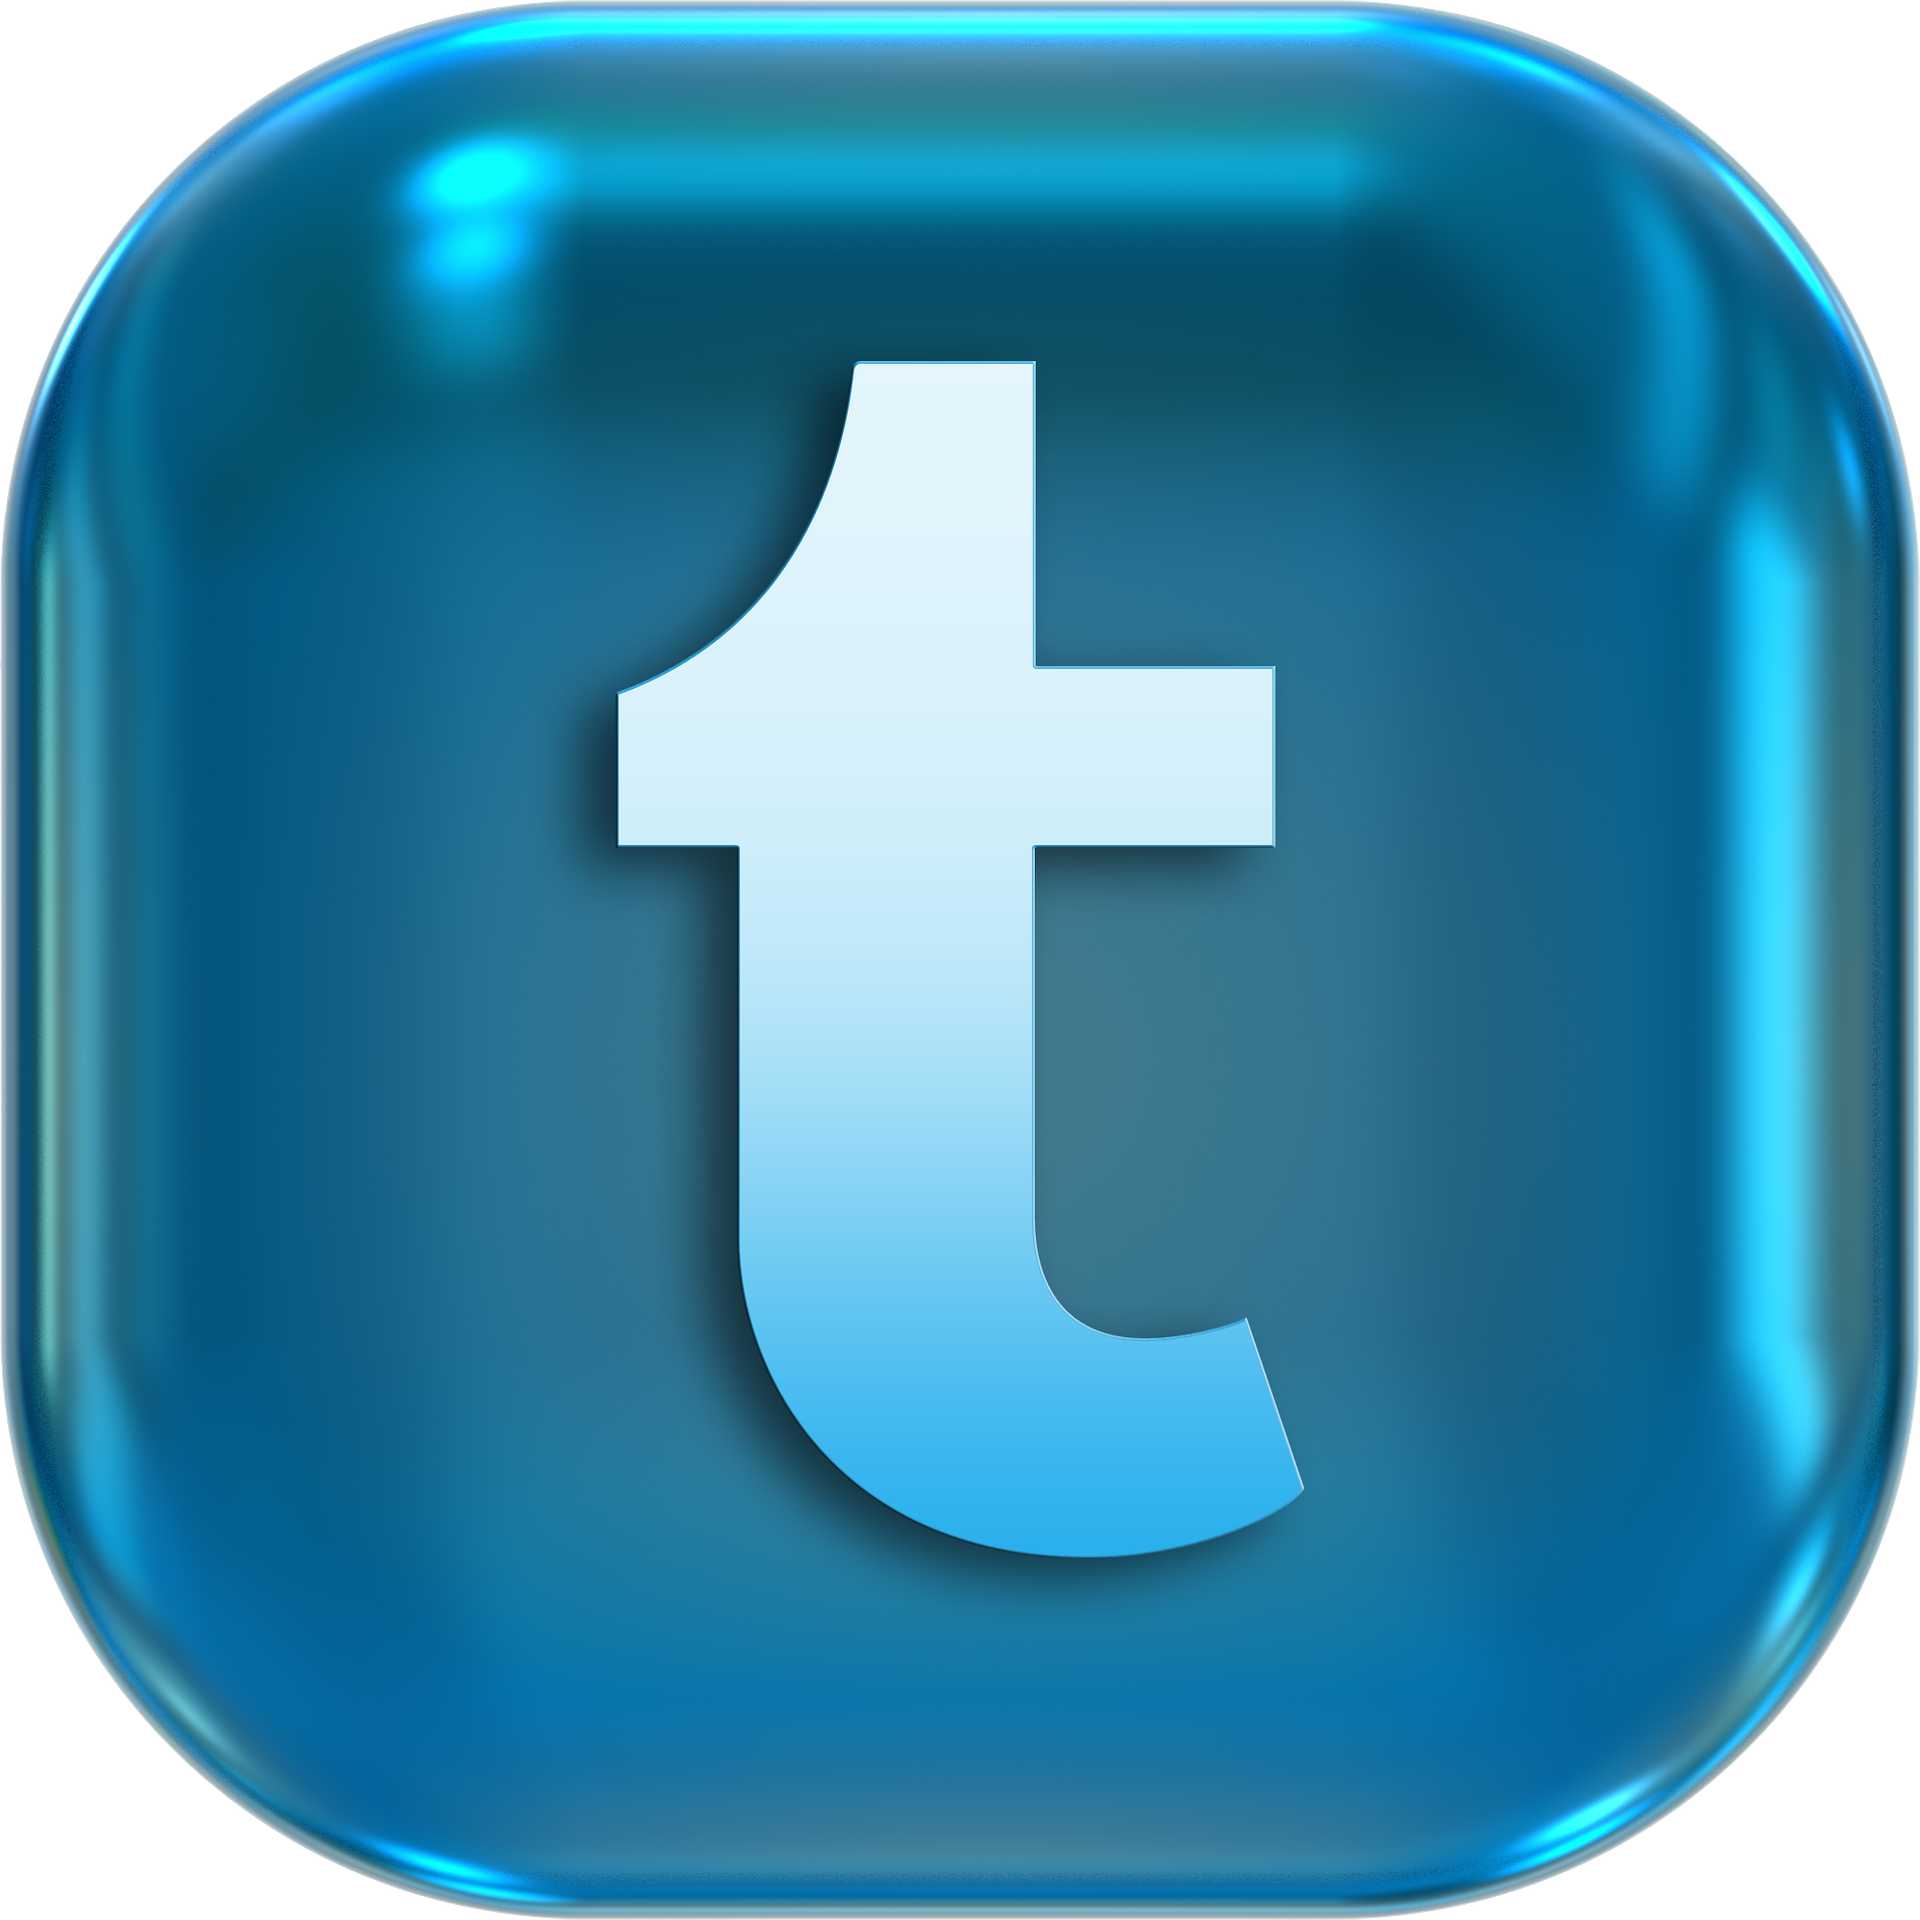 Redes Sociales - Twitter